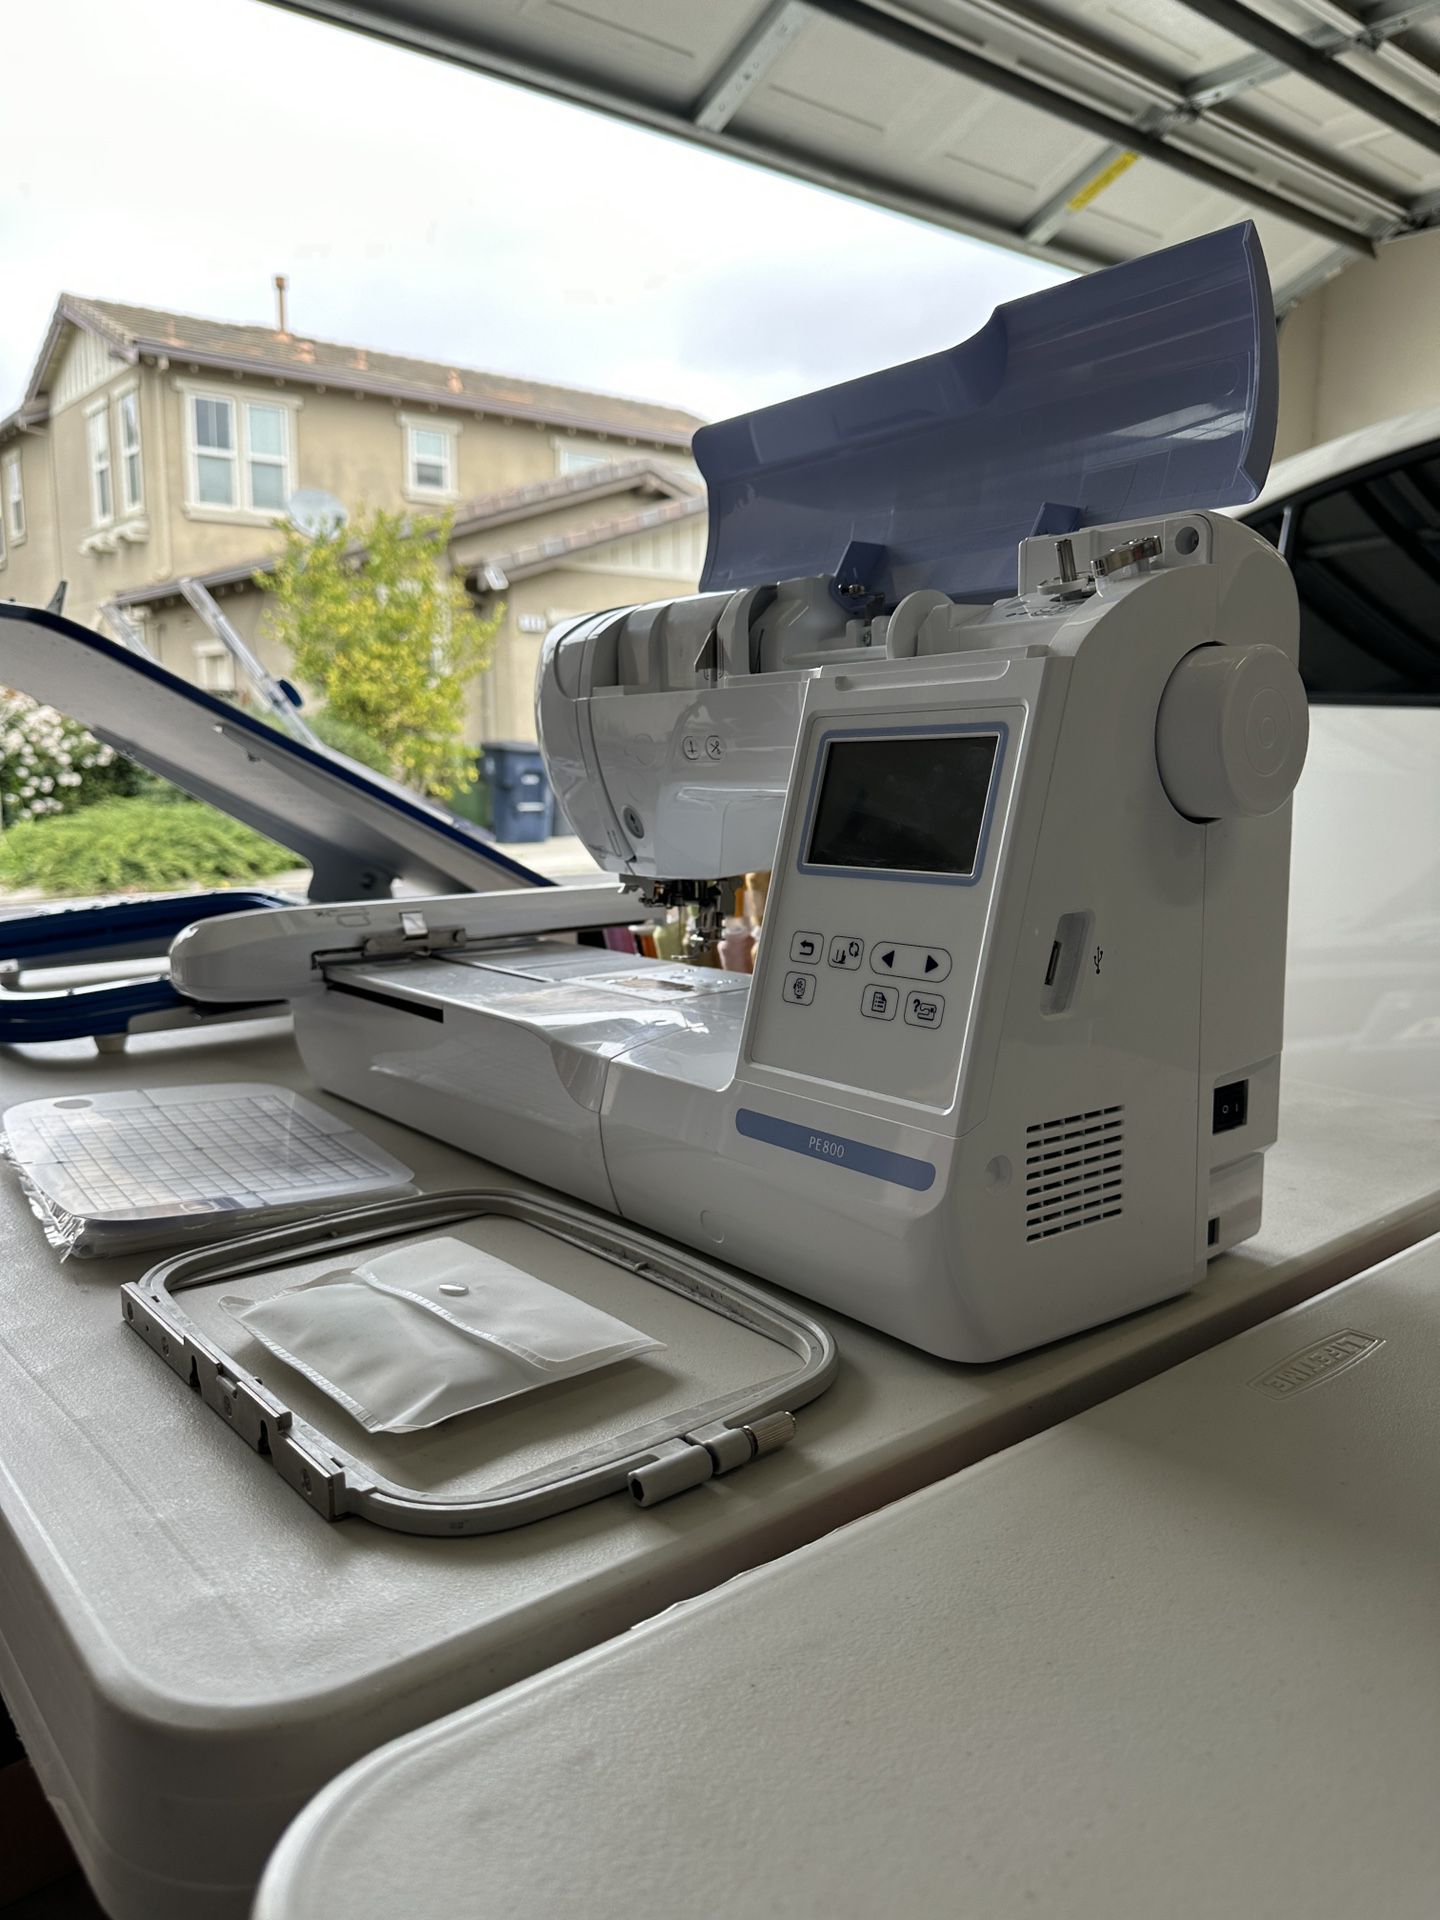 Brother PE800 Embroidery Machine for Sale in Costa Mesa, CA - OfferUp